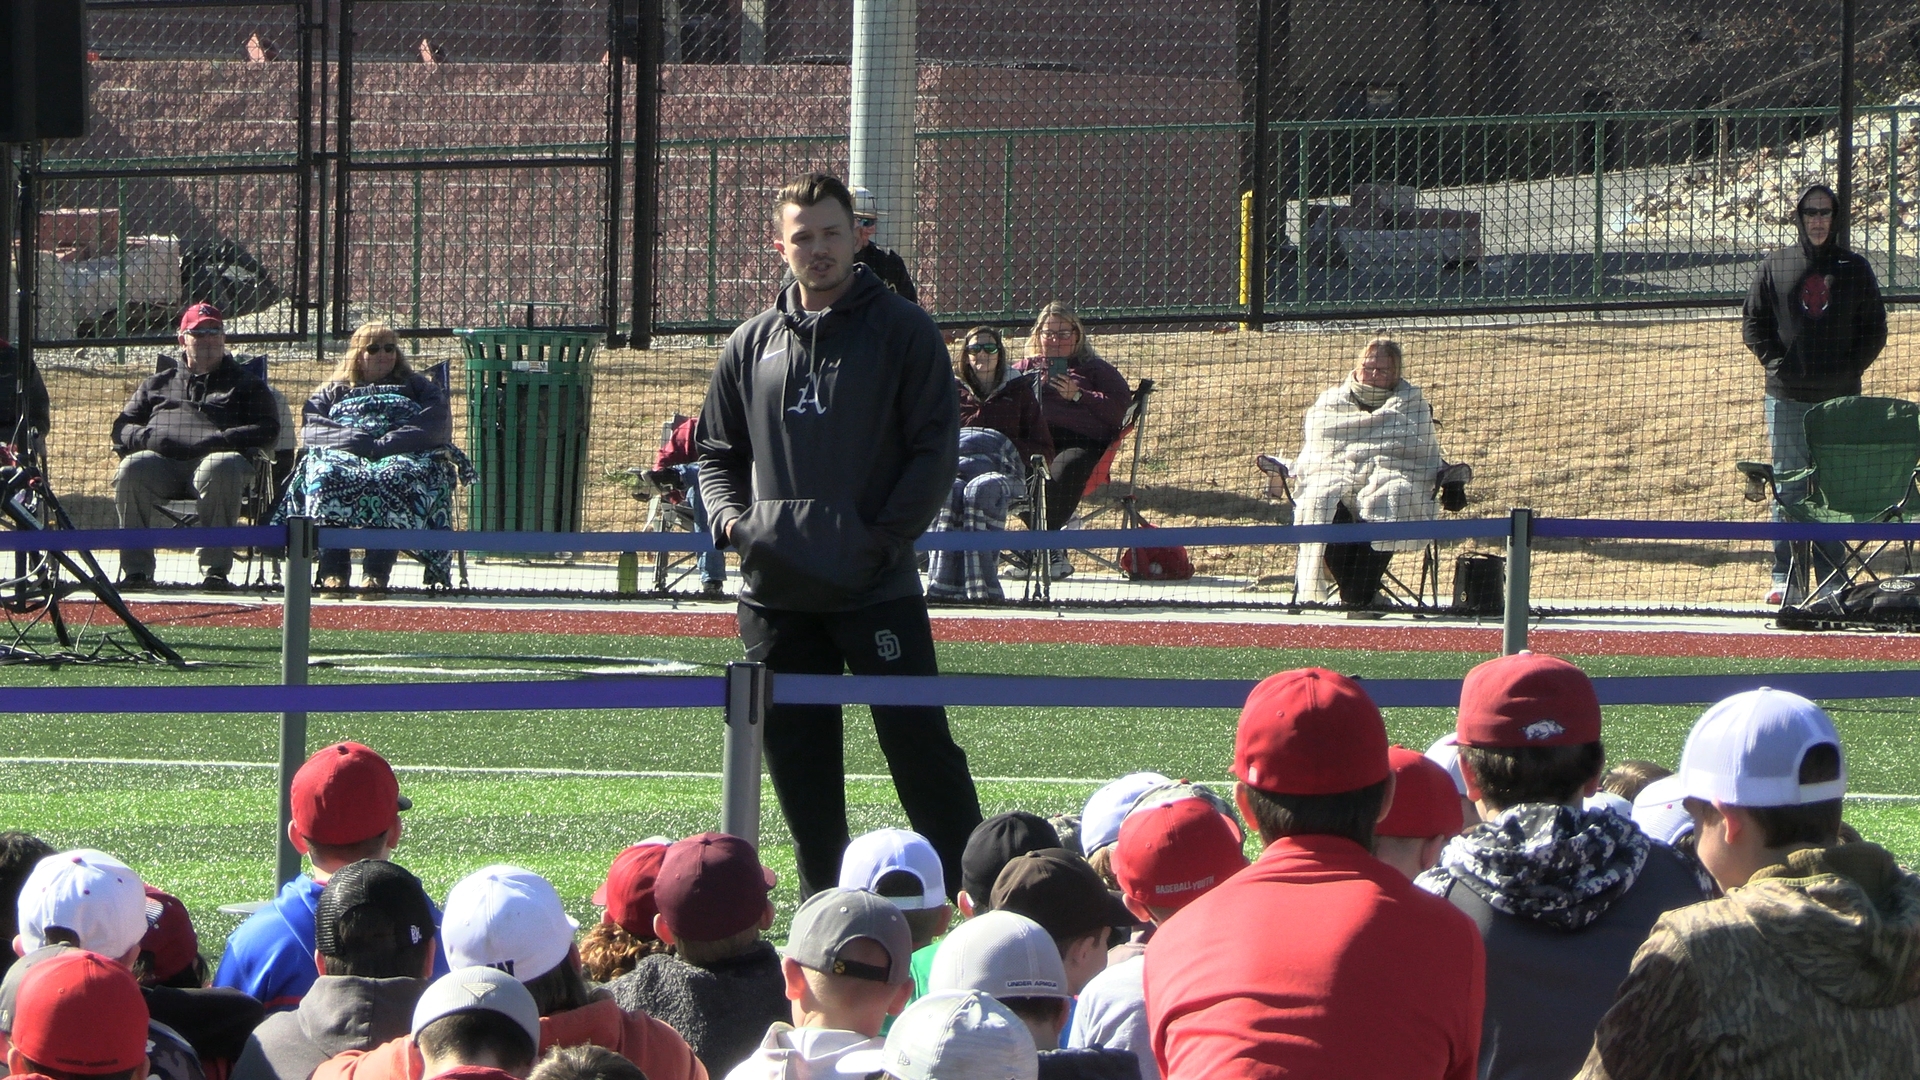 WATCH: Former Hogs ace speaks at Majestic Park